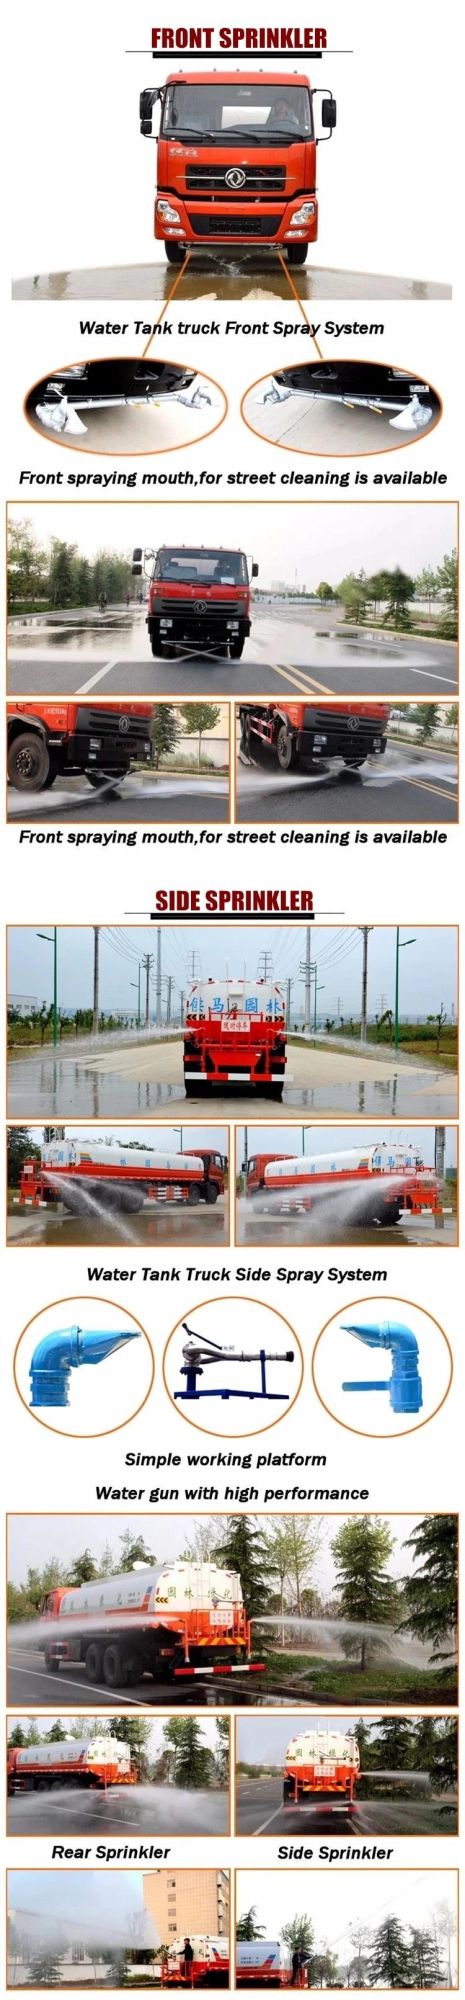 Shacman L3000 220HP 12000liter 15000liters Water Spray Trucks with Rear Working Platfrom